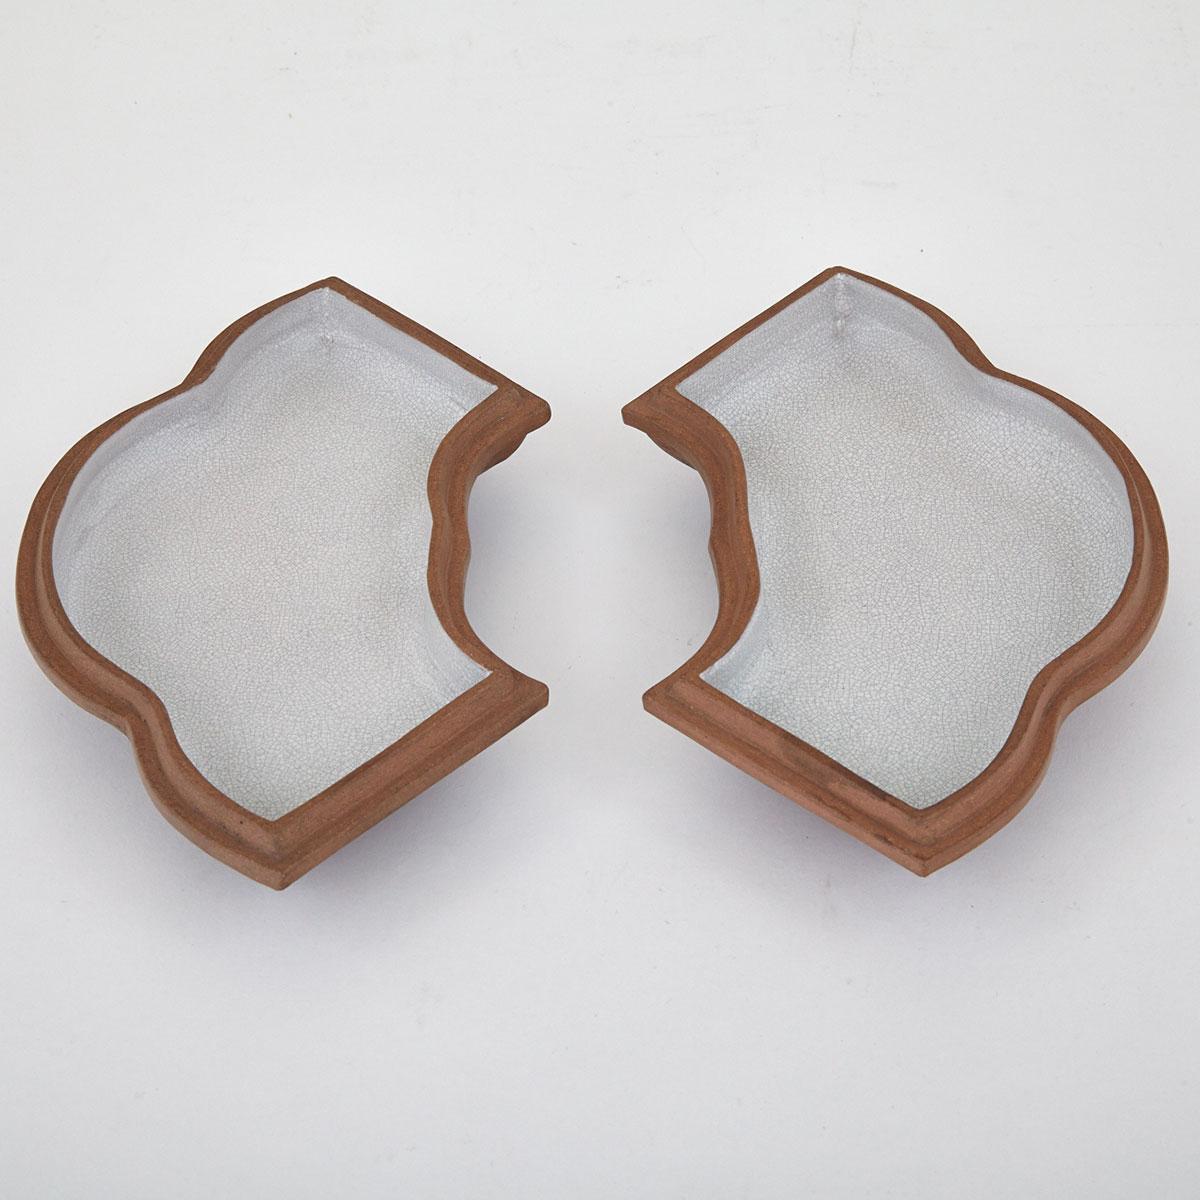 Pair of Yixing and Porcelain Tea Trays